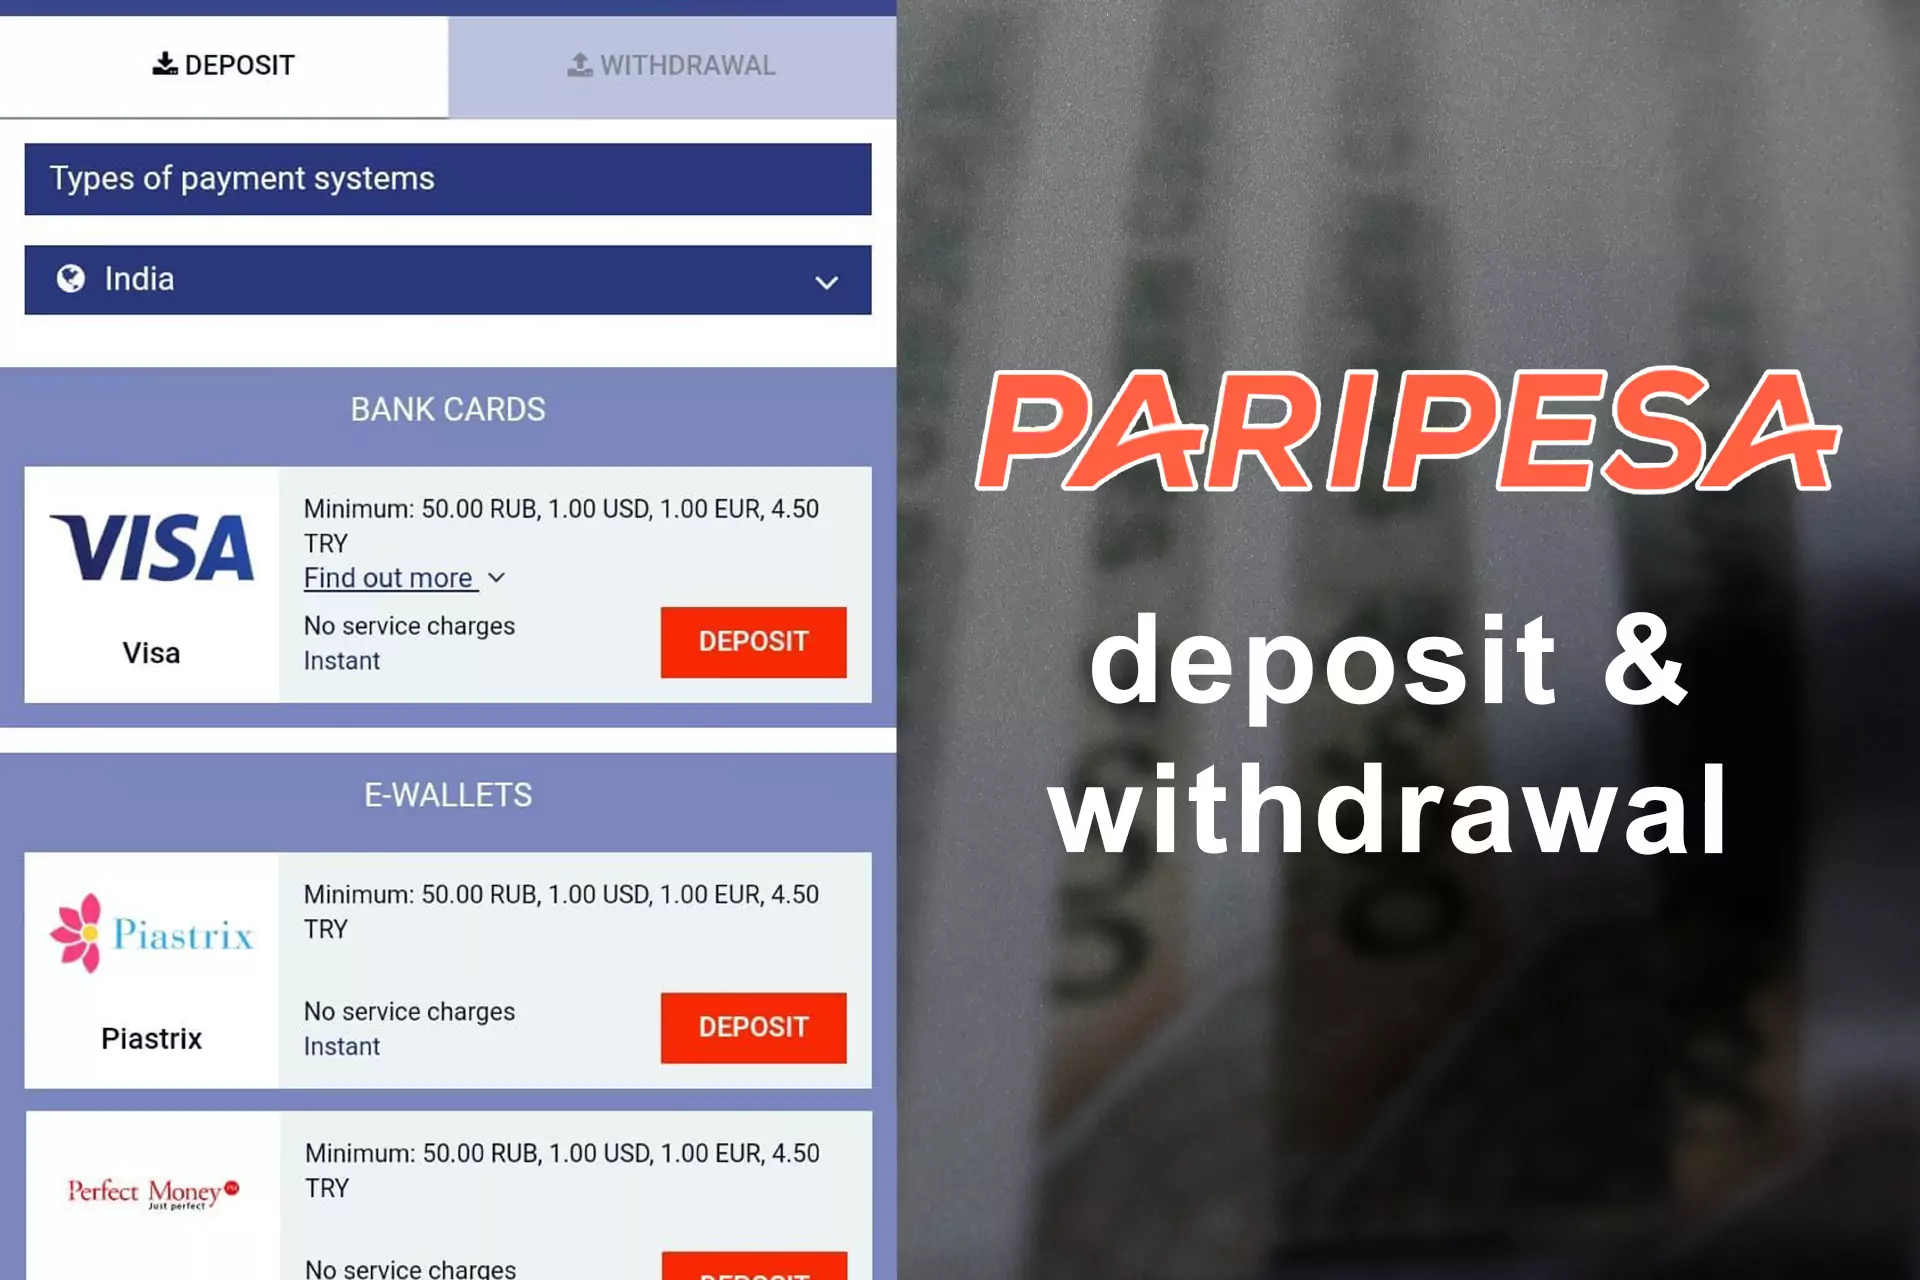 You can deposit and withdraw funds with your payment system.